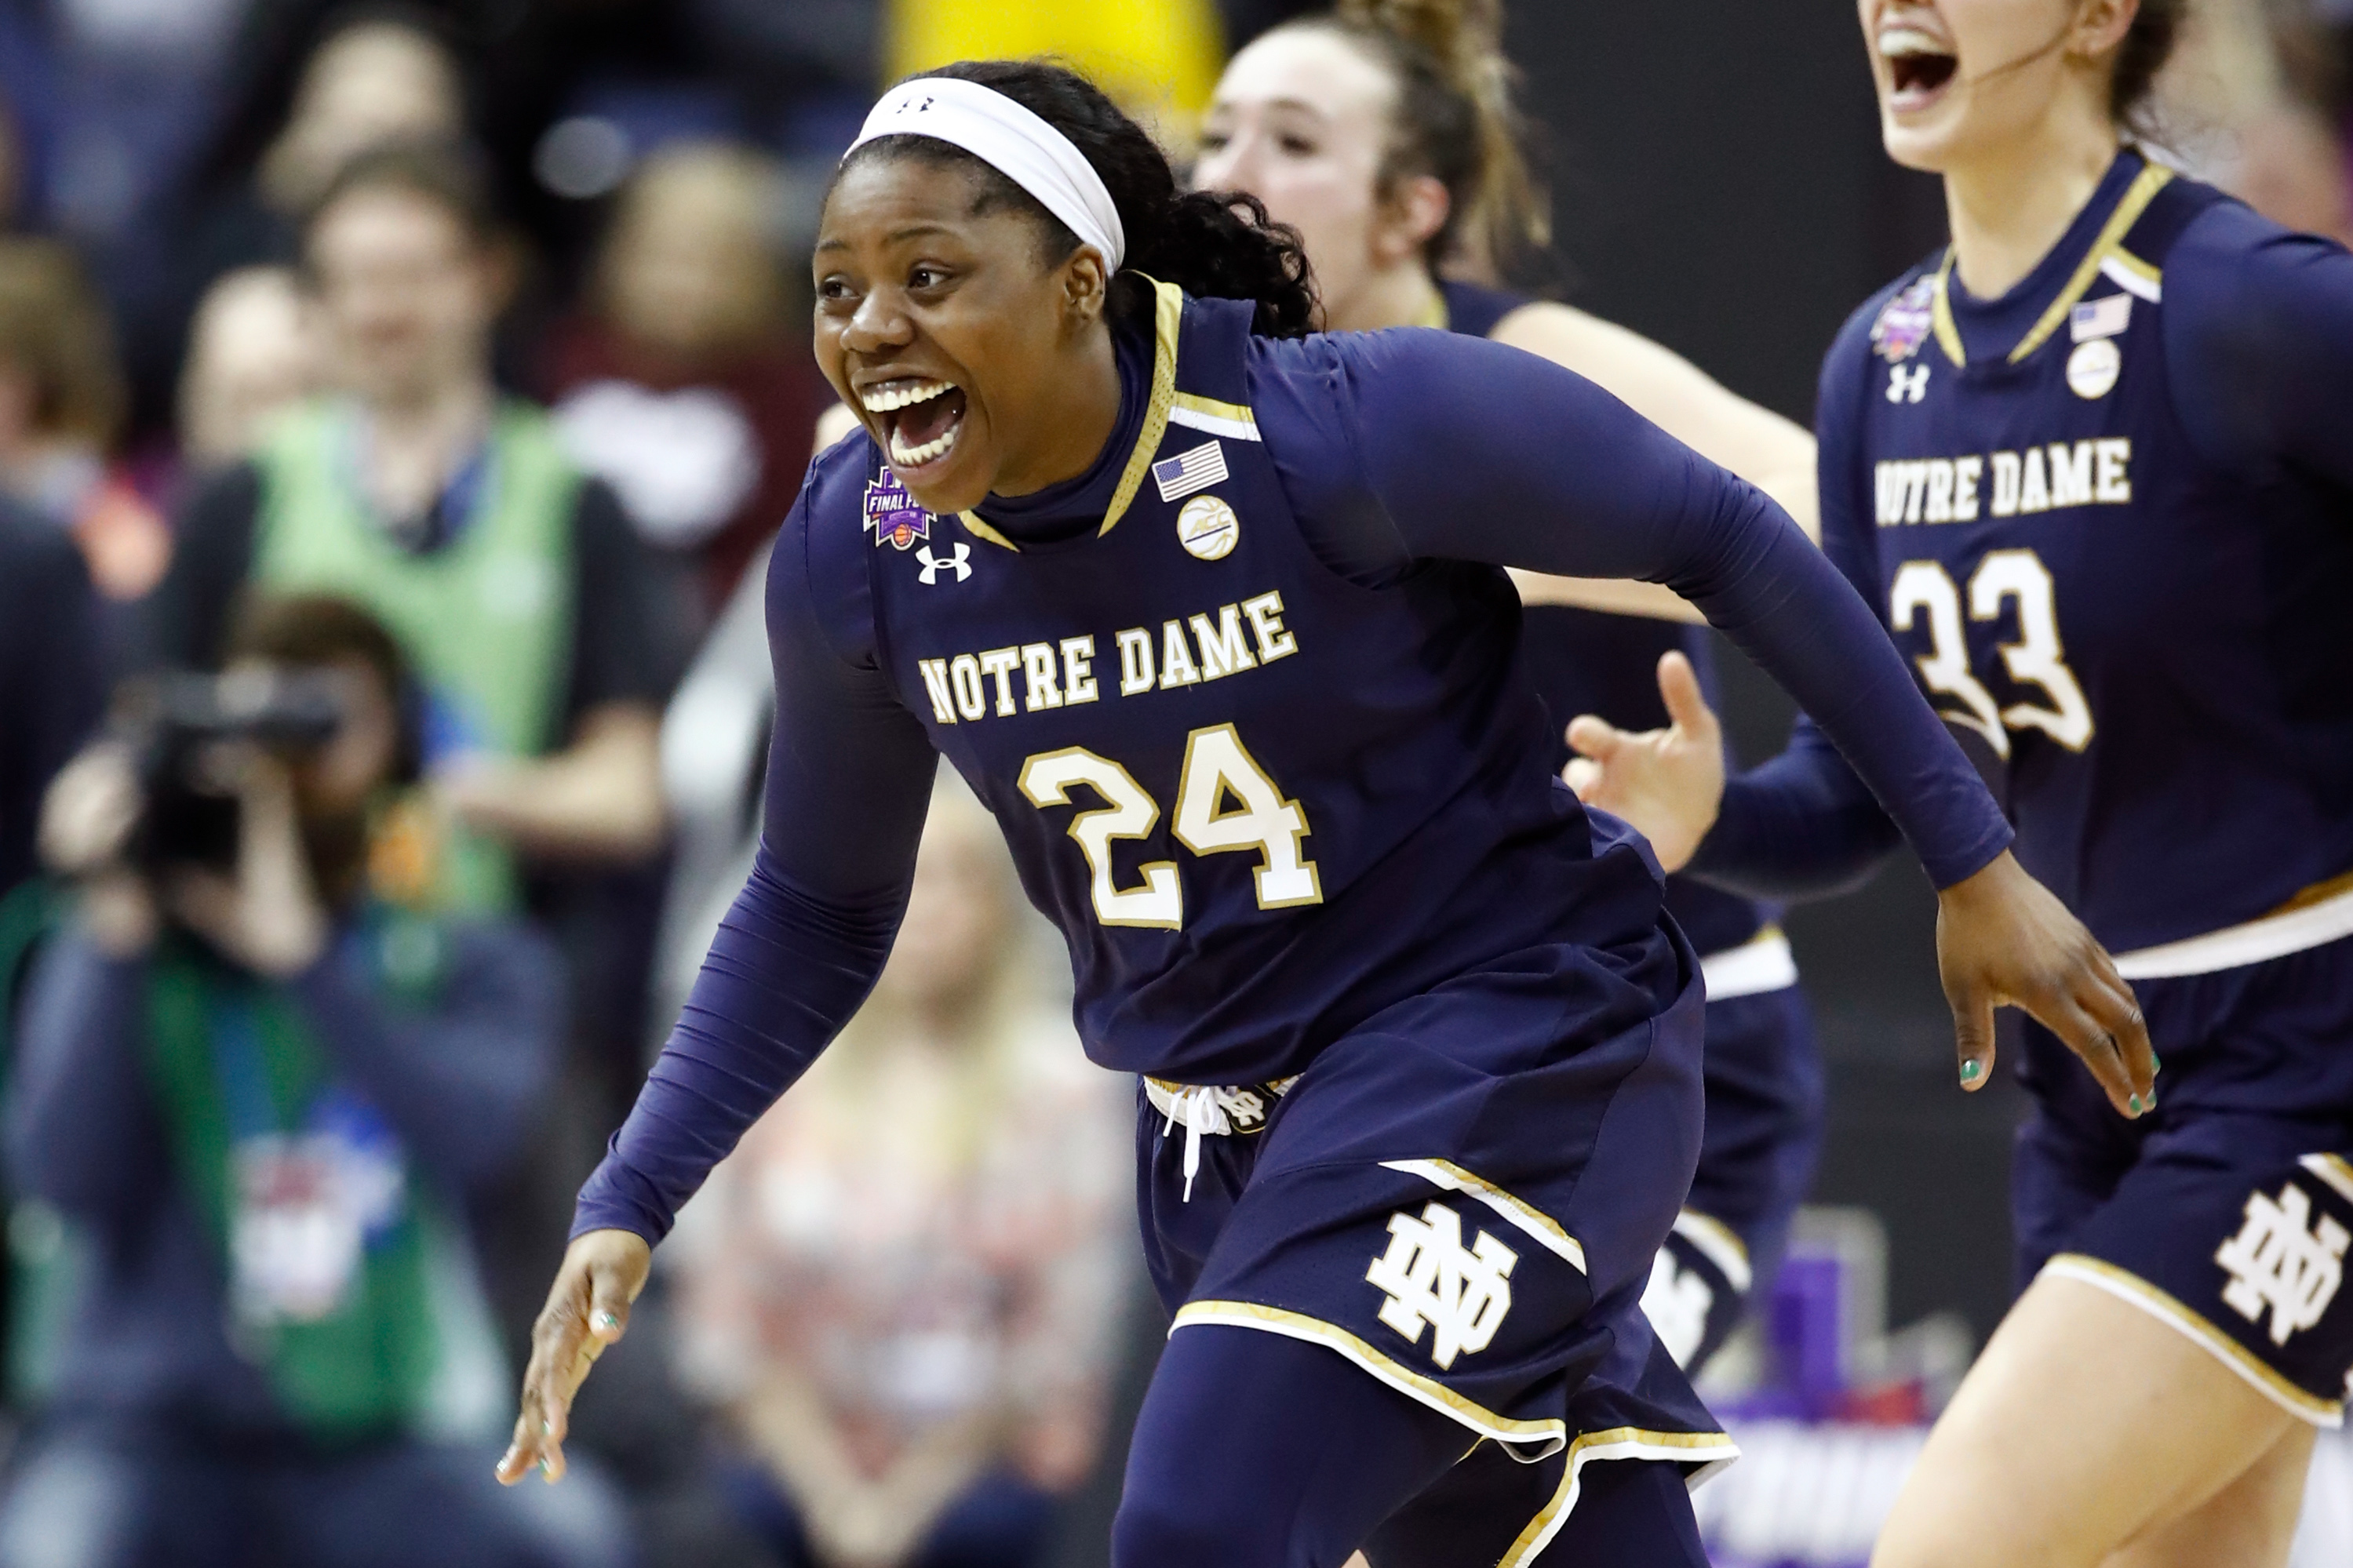 Arike Ogunbowale #24 of the Notre Dame Fighting Irish celebrates after scoring the game winning basket with 0.1 seconds remaining in the fourth quarter to defeat the Mississippi State Lady Bulldogs in the championship game of the 2018 NCAA Women's Final Four at Nationwide Arena on April 1, 2018 in Columbus, Ohio. (Andy Lyons&mdash;Getty Images)